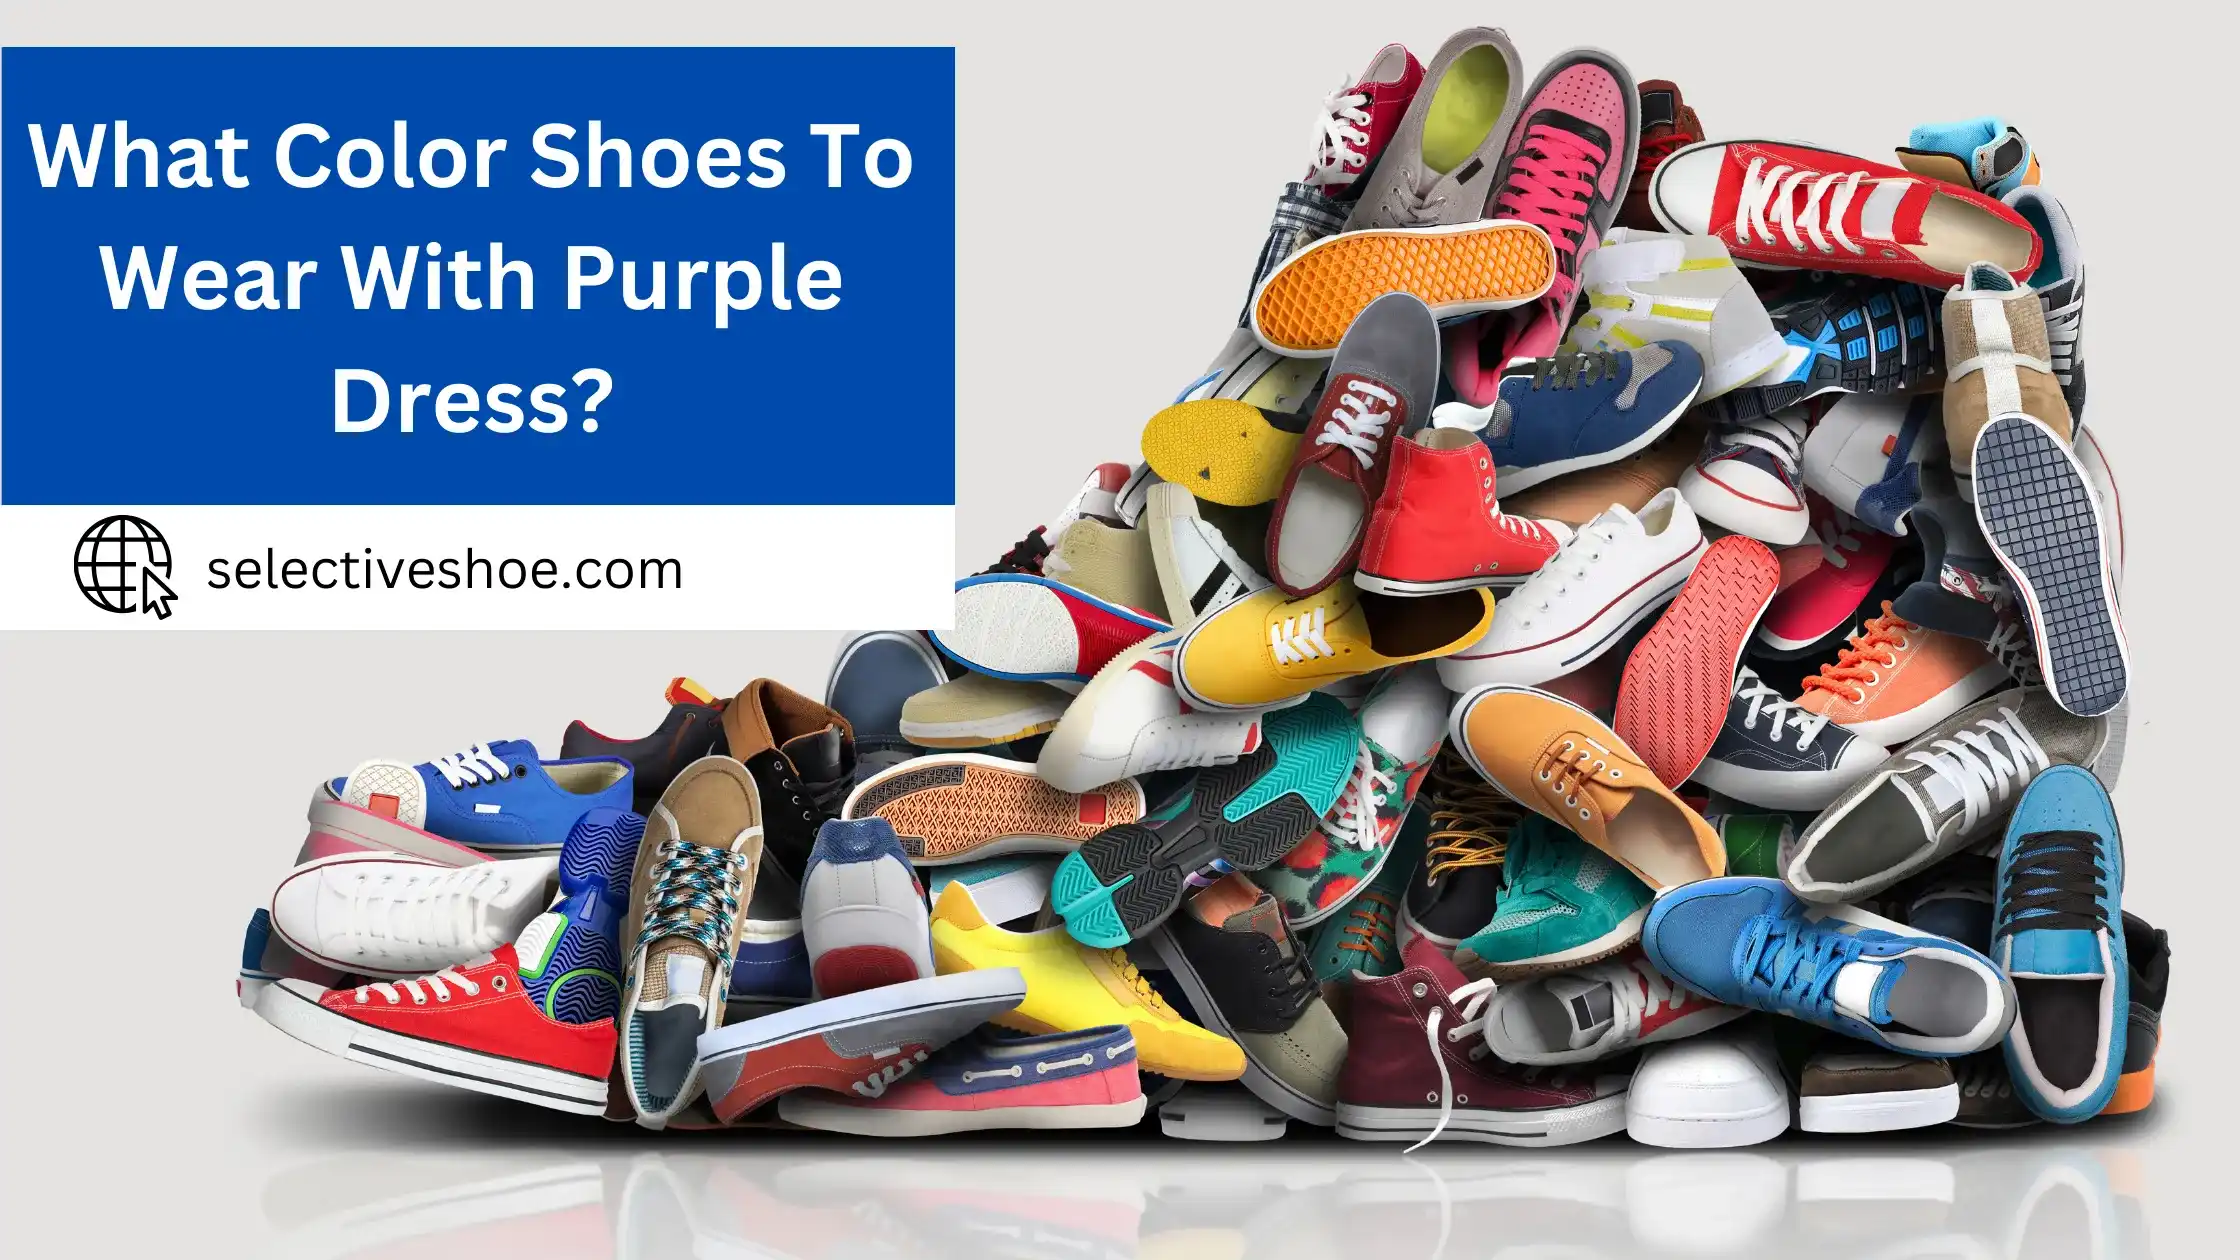 What Color Shoes To Wear With Purple Dress? Best Explained